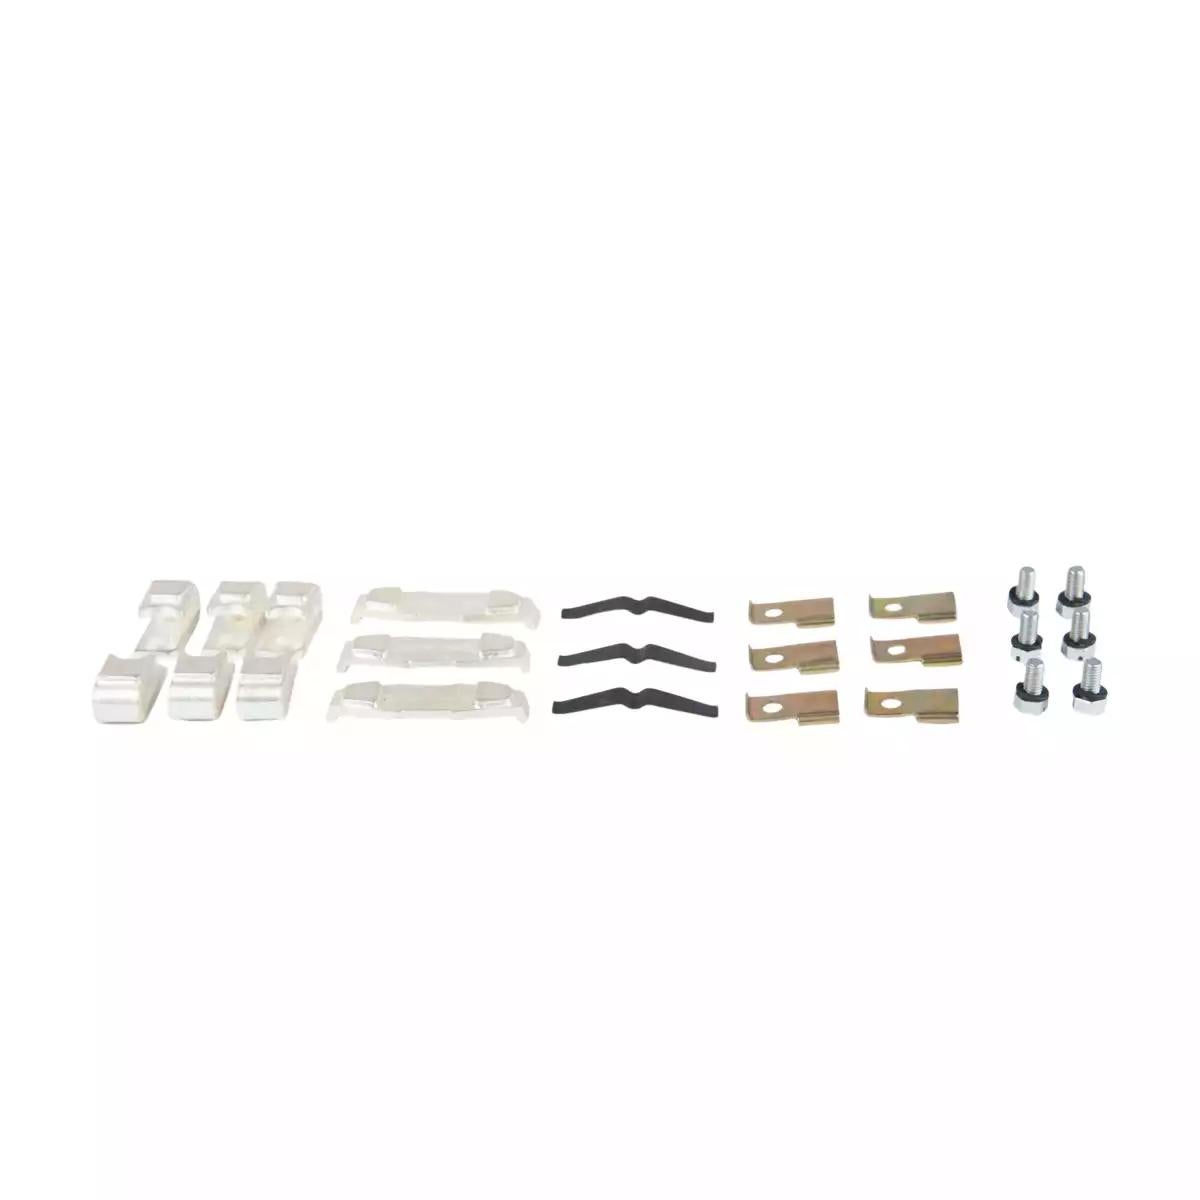 MNX 70 - Spare Contact Kit